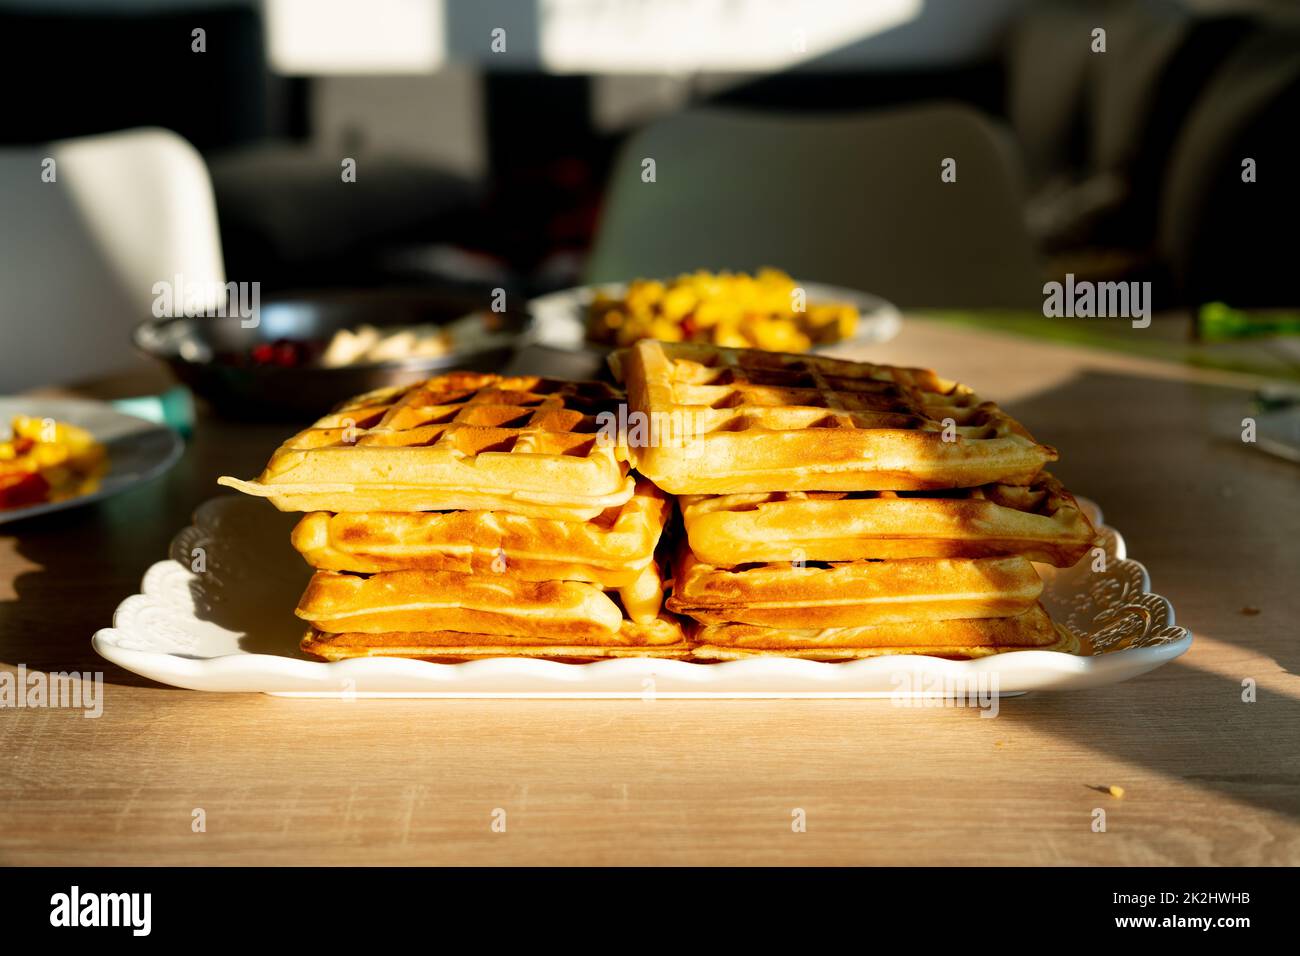 A pile of waffles in a plate on the table Stock Photo